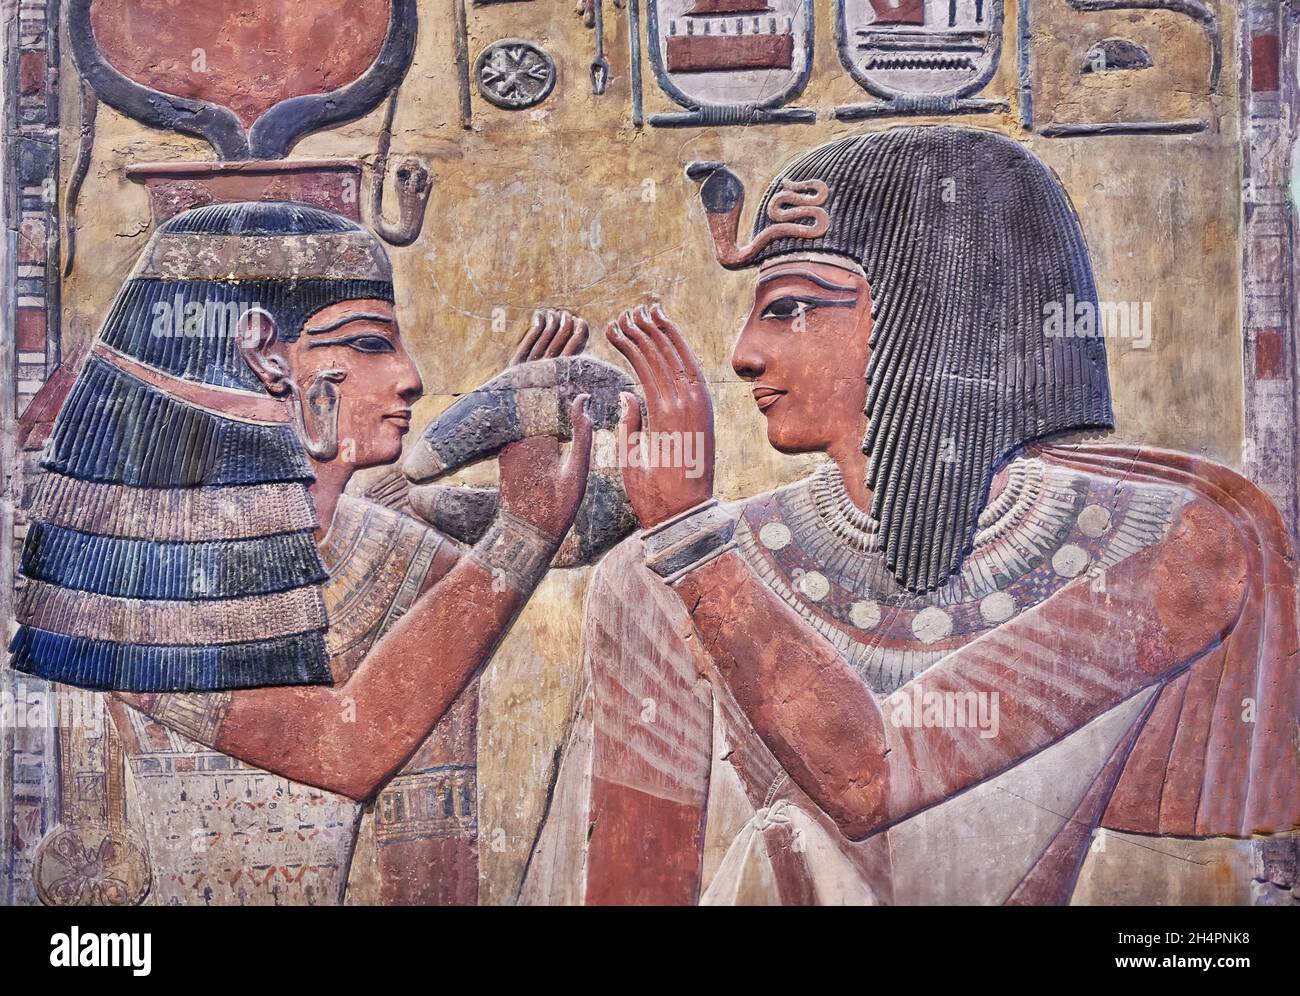 Ancient Egyptian tomb relief mural of Seti I and goddess Hathor, 1294-1279, KV17 Tomb of Seti I Vally of Kings Thebes. Louvre Museum B7 or N124. Decor Stock Photo